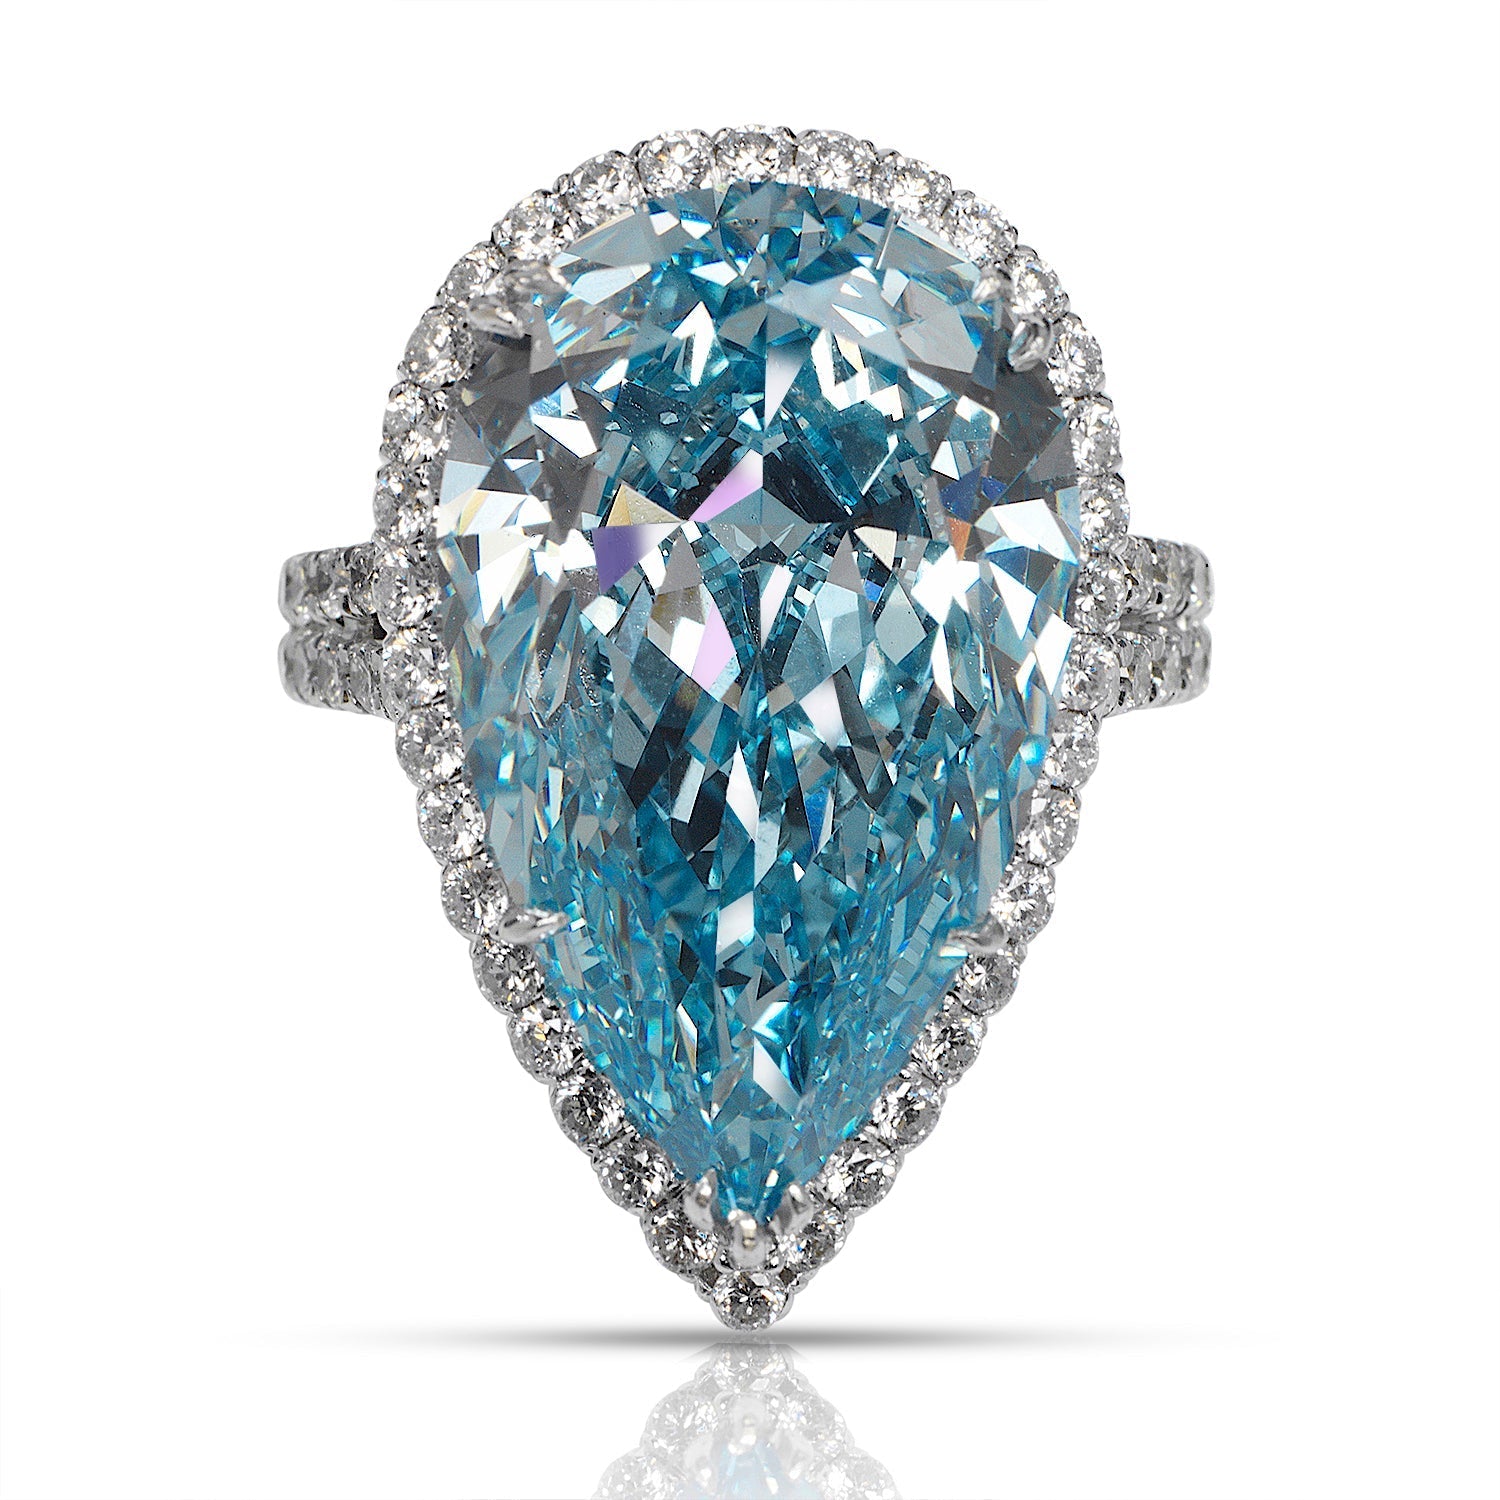 Why Choose Blue Diamond For Your Engagement Ring